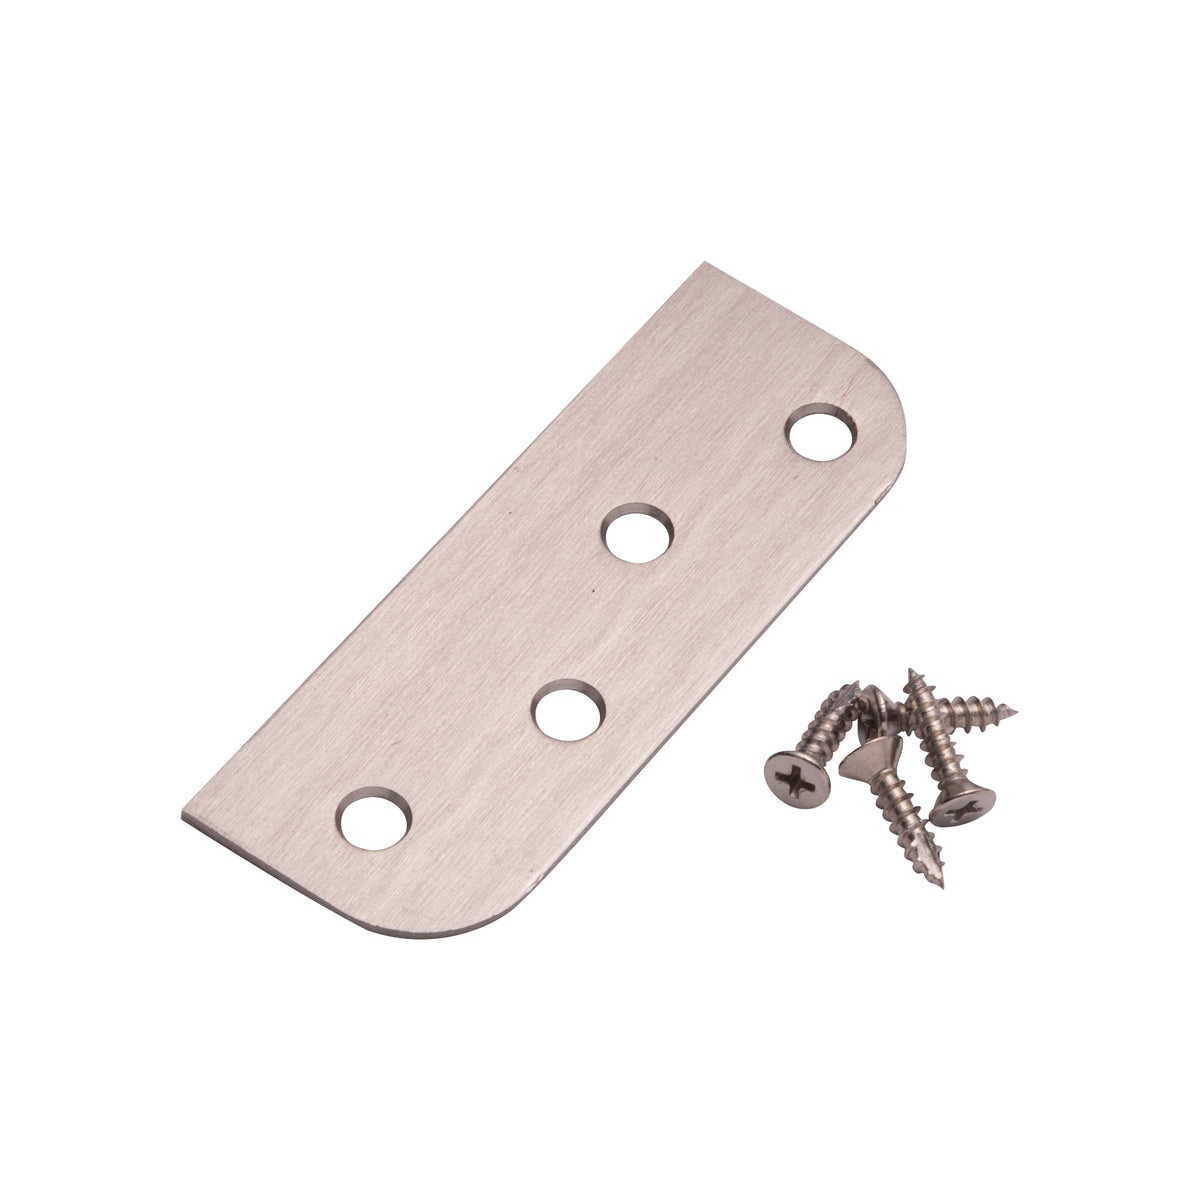 Hinge Blanks - Filler Plates with Screws - 4 Inches - Multiple Finishes Available - 3 Pack